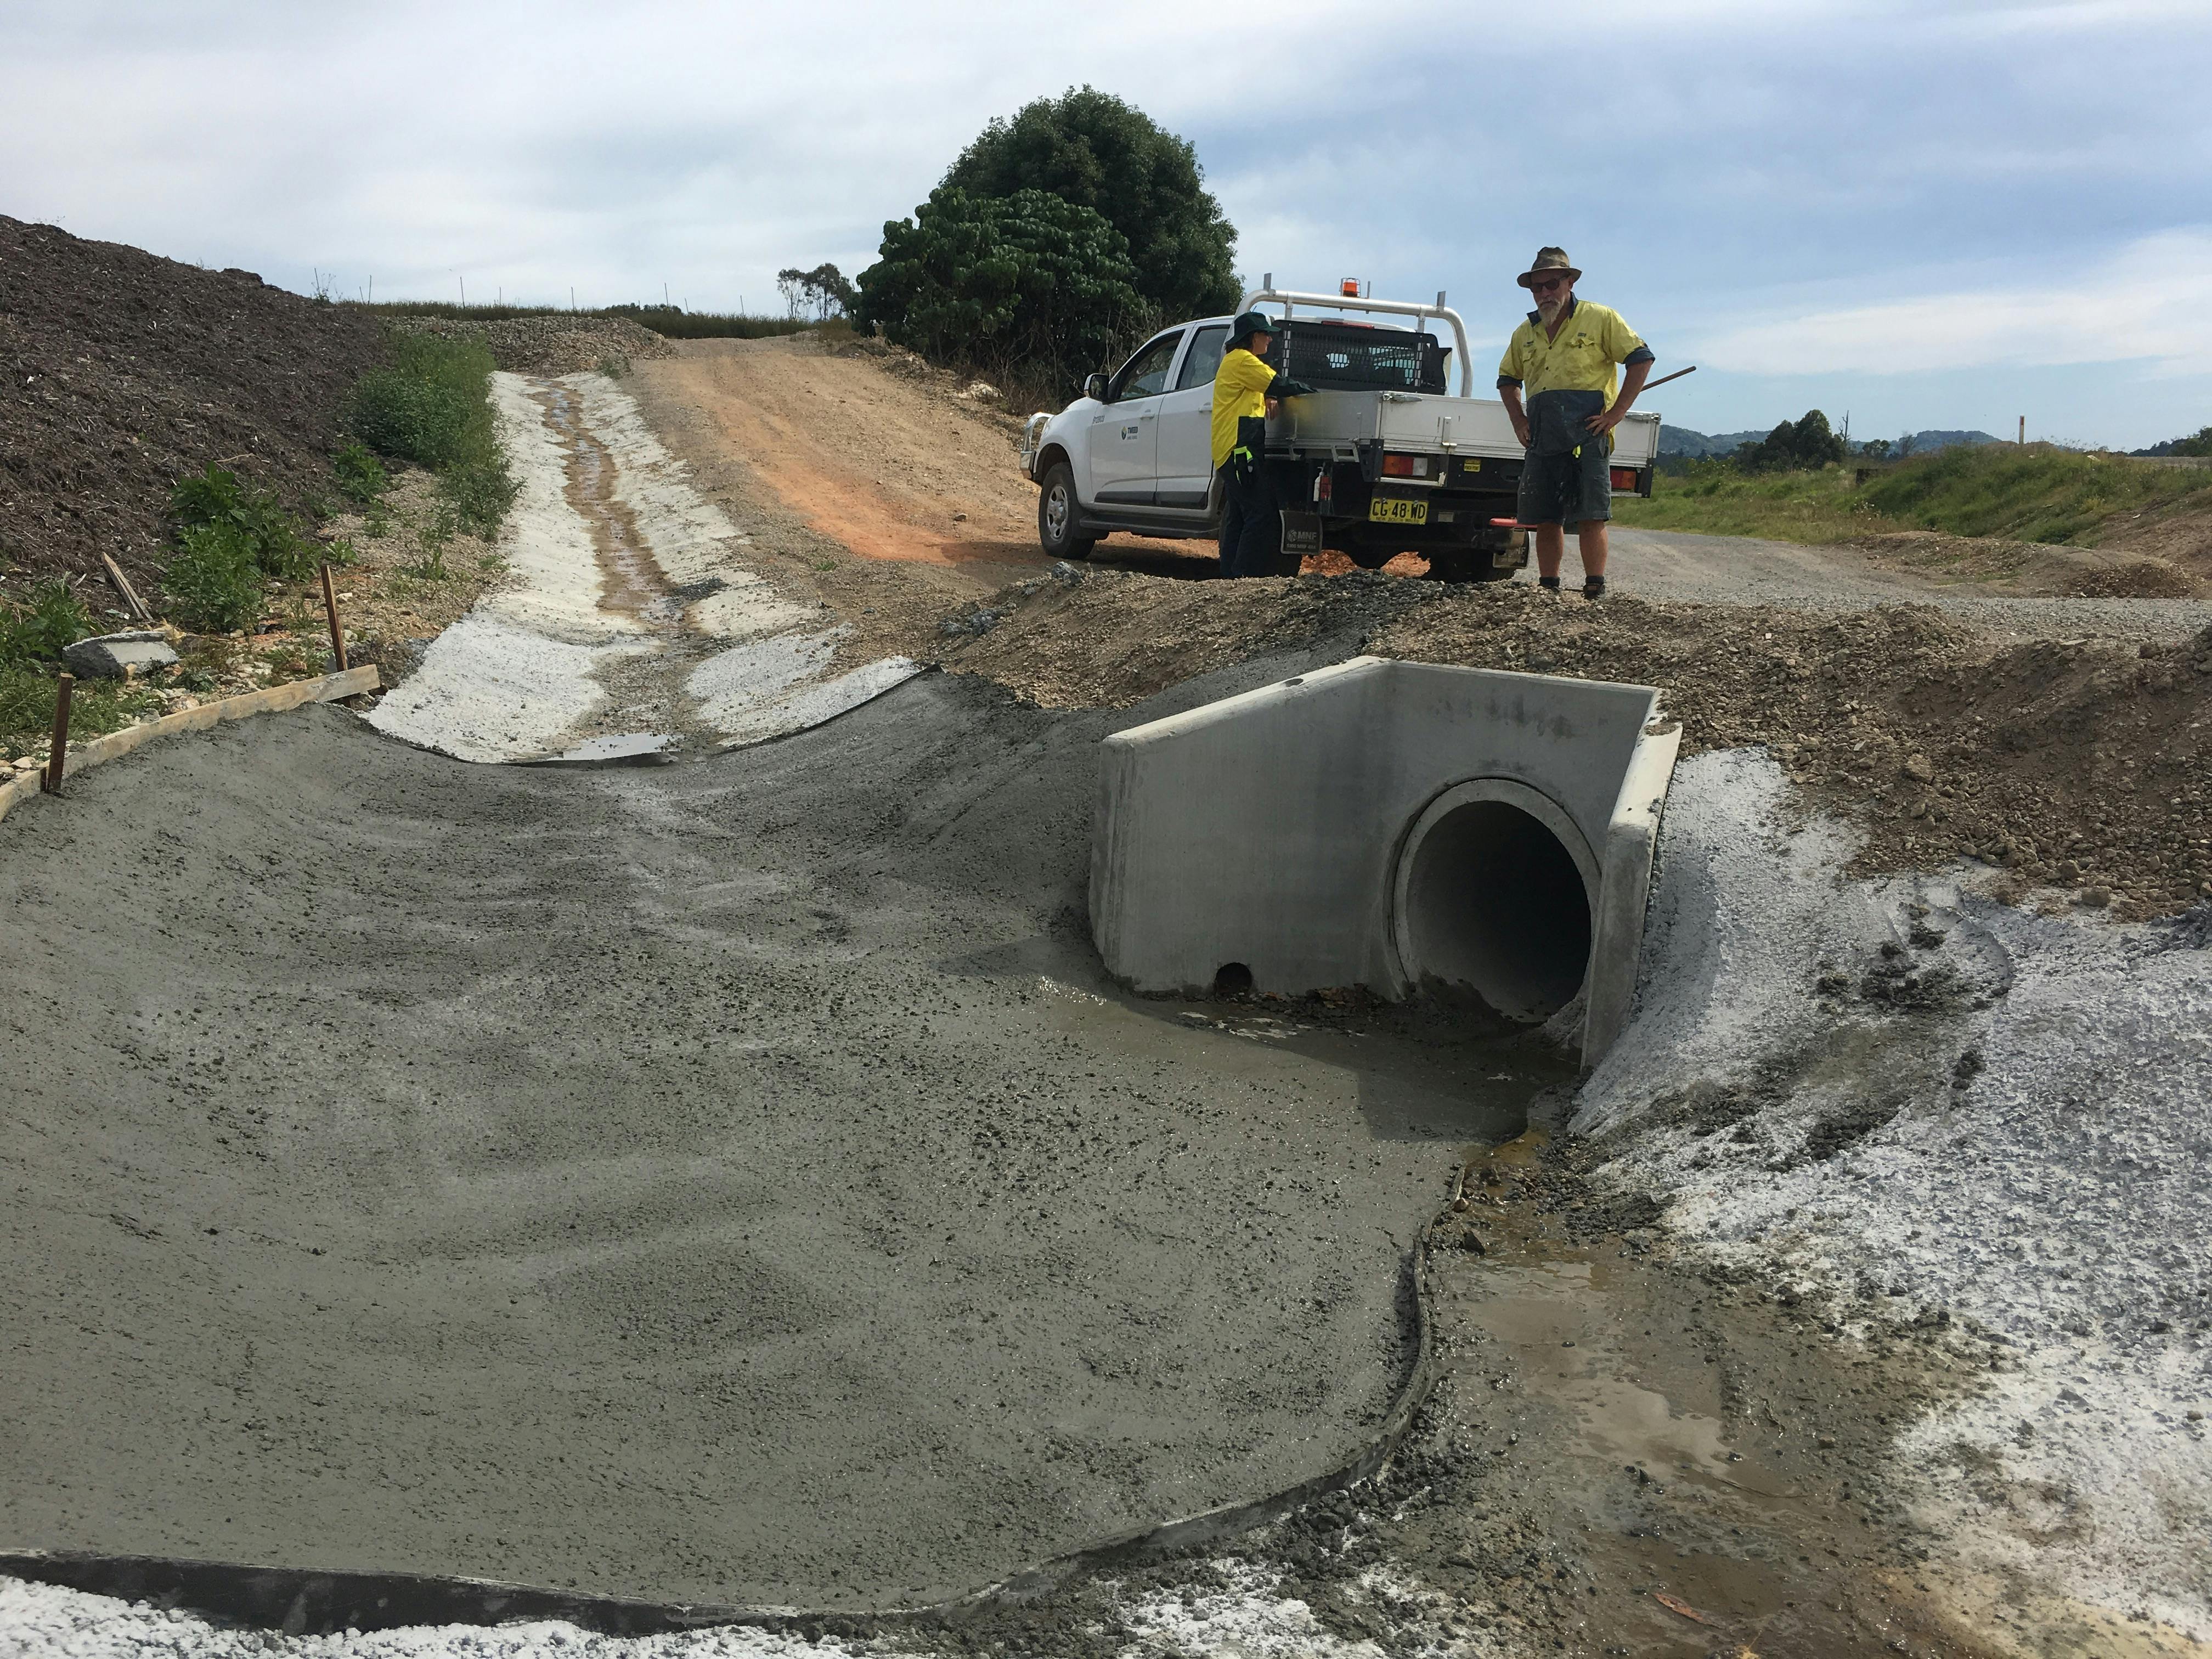 Upgrading drainage at the site